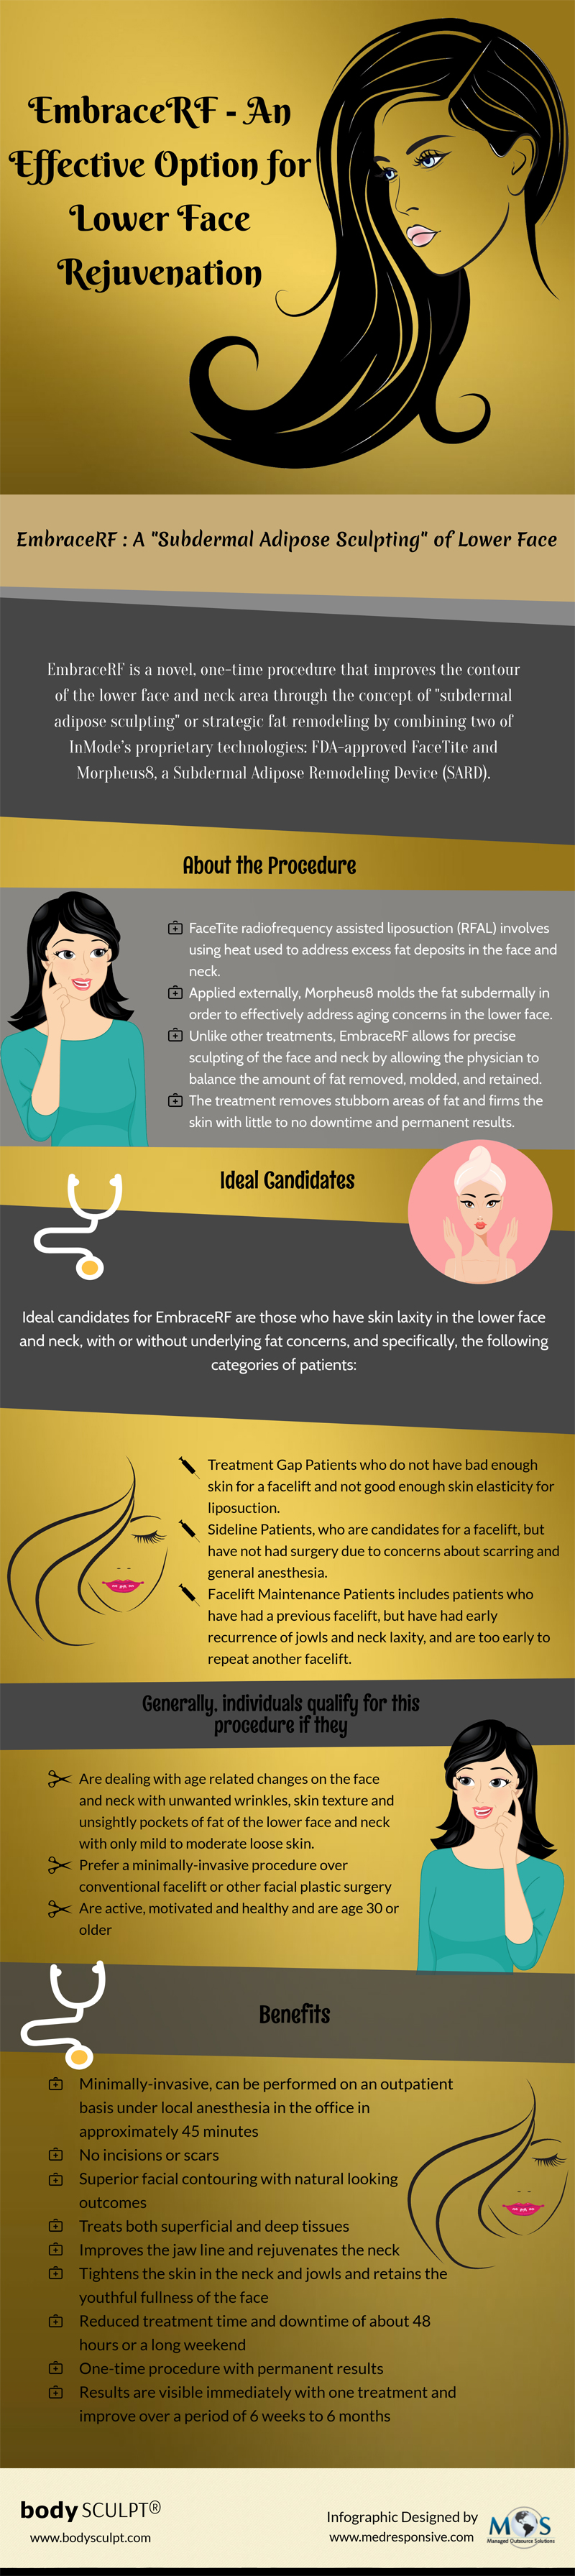 EmbraceRF - An Effective Option for Lower Face Rejuvenation [infographic]